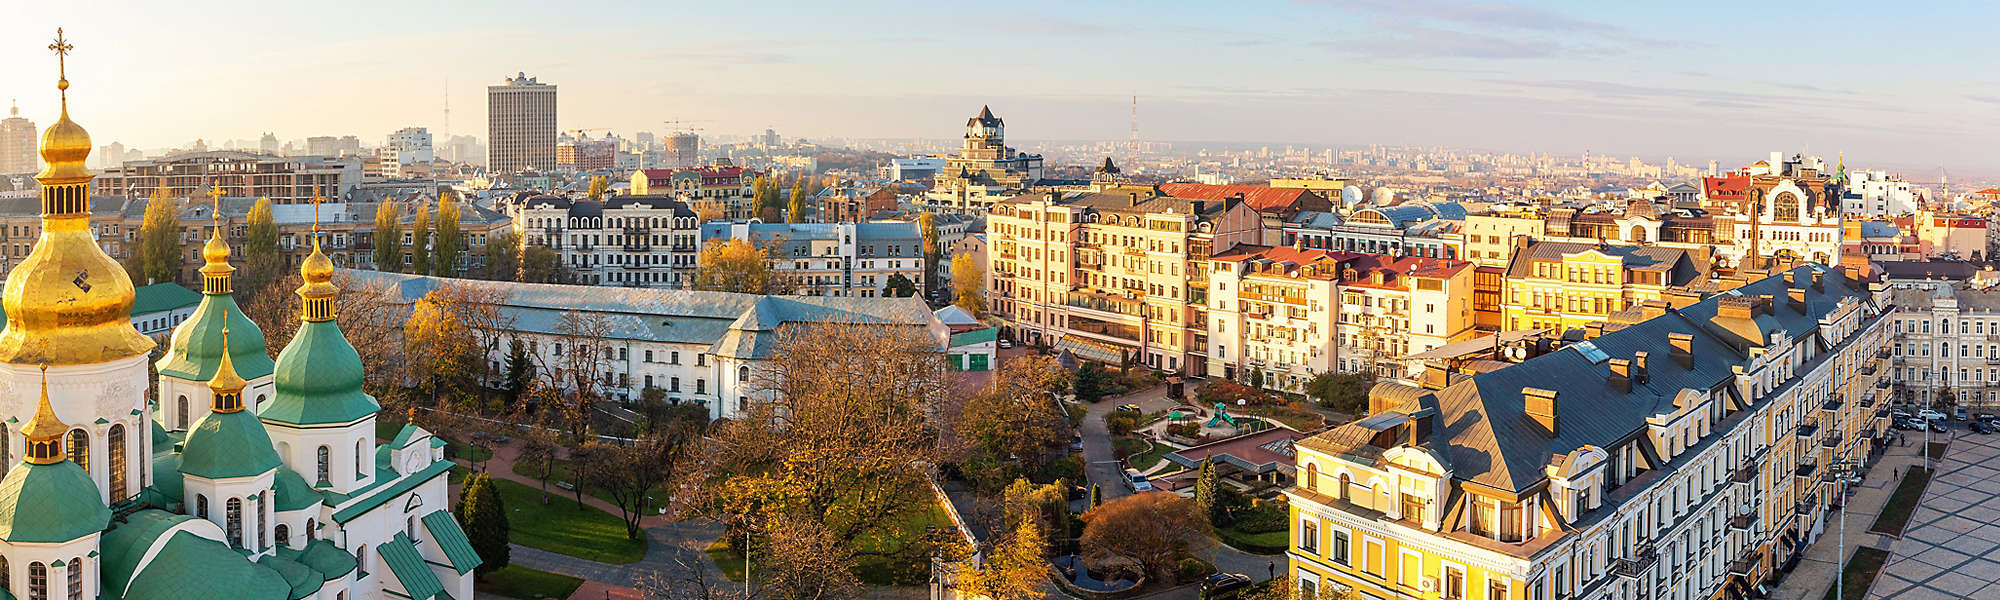 Aerial view of Kyiv city, center district, Ukraine. Panoramic cityscape